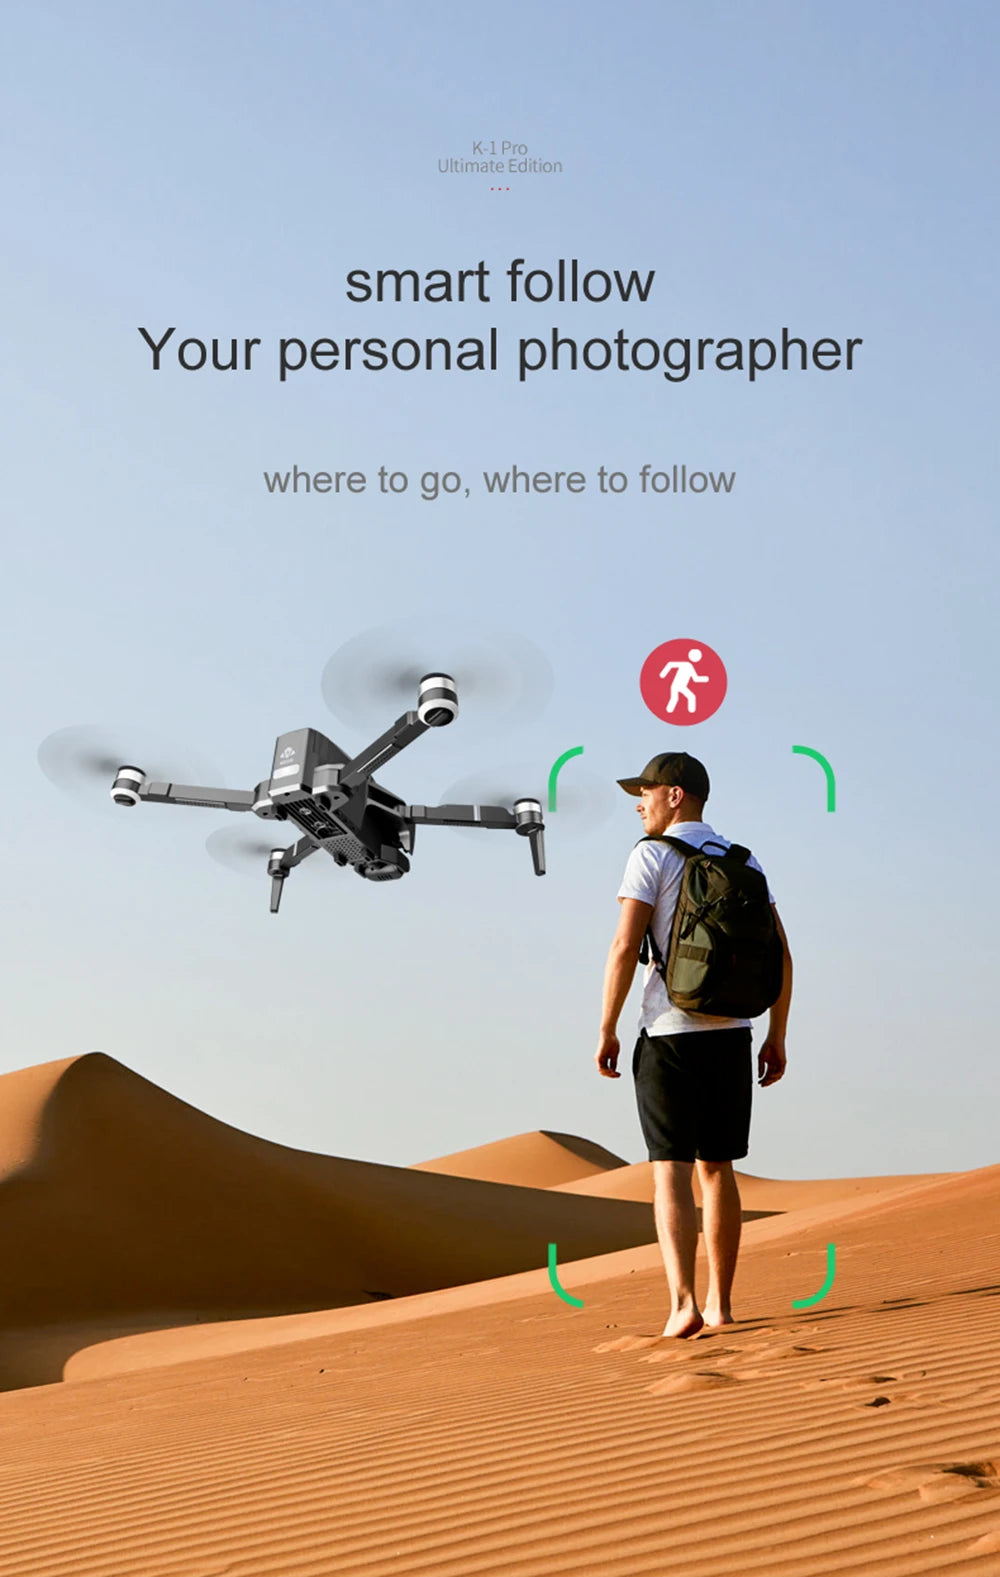 VISUO ZEN K1 PRO Drone, K-l Pro Ultimate Edition smart follow Your personal photographer where to go, where to